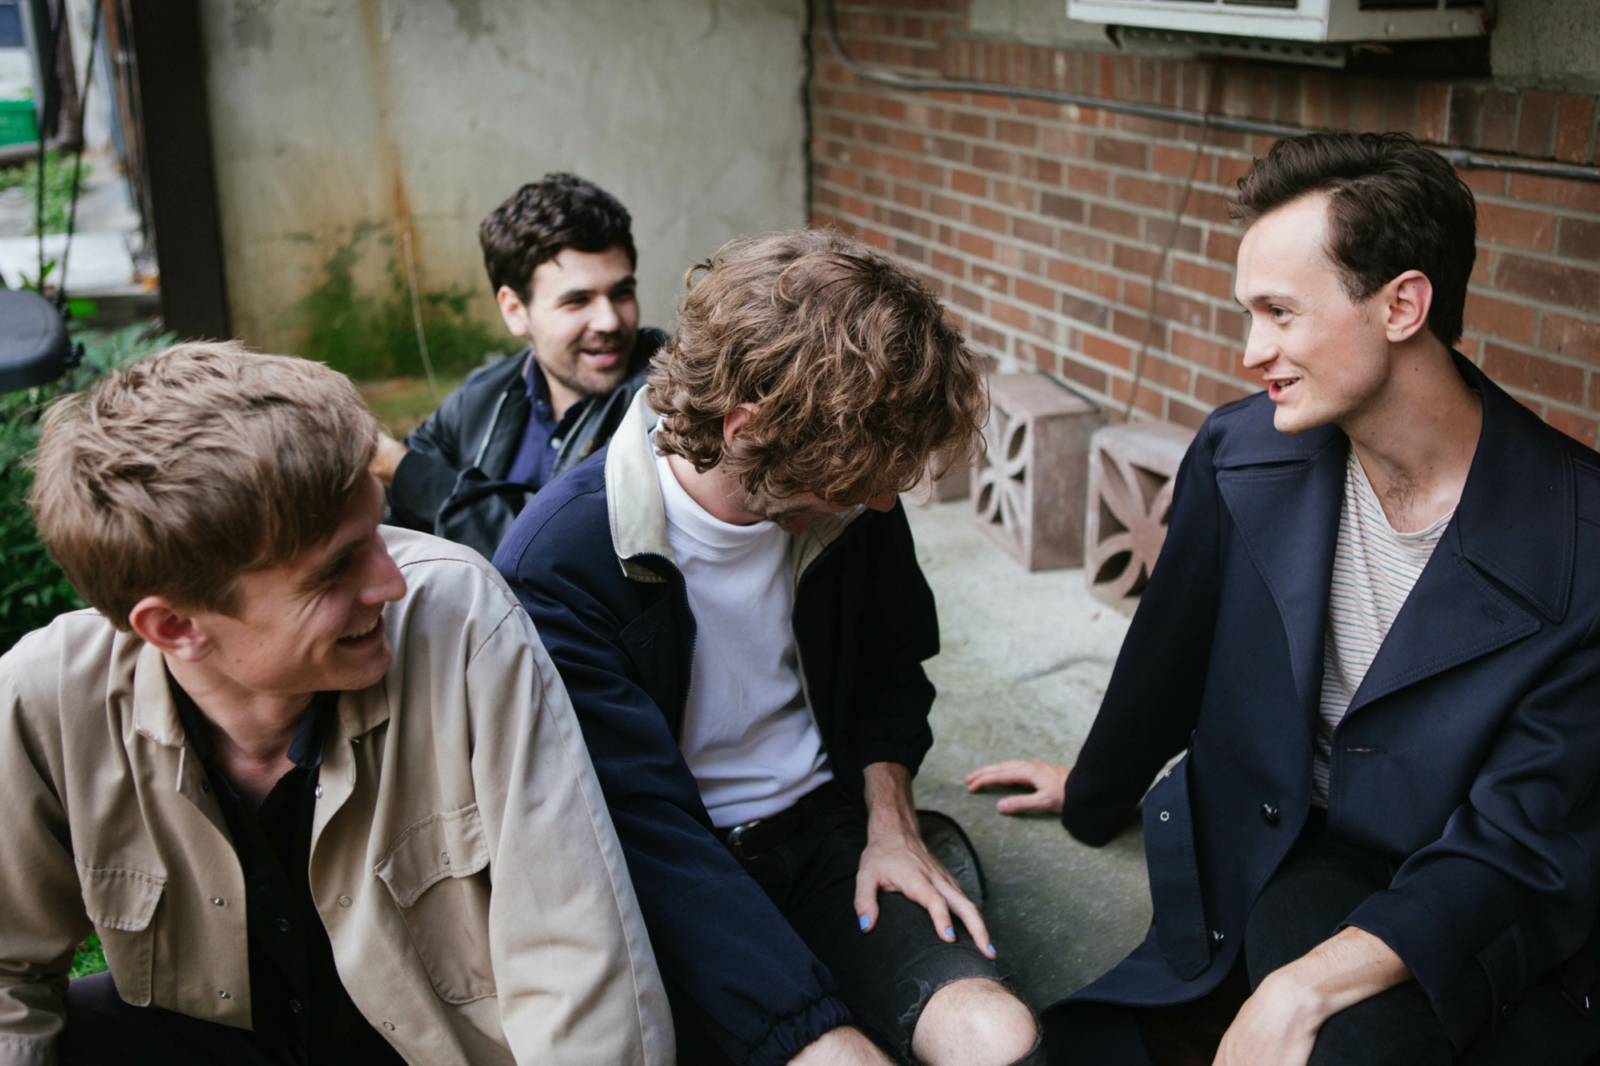 Ought announce new album ‘Room Inside The World’